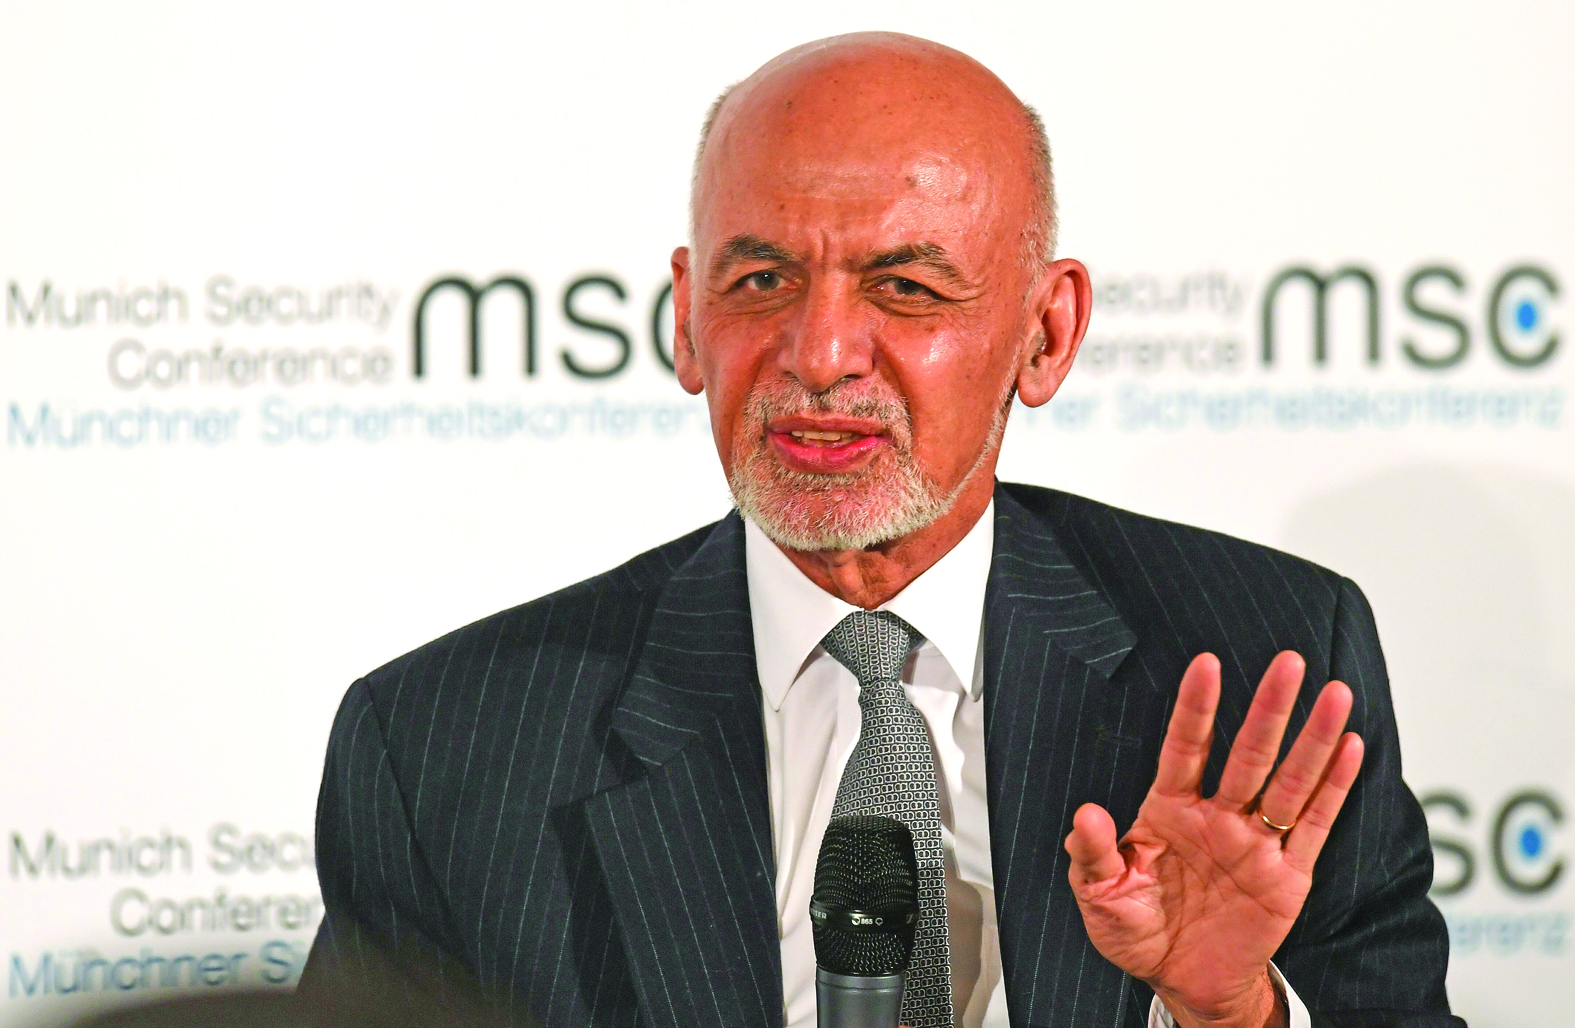 President of Afghanistan Ashraf Ghani takes part in a panel discussion during the 56th Munich Security Conference (MSC) in Munich, southern Germany, on February 15, 2020. - The 2020 edition of the Munich Security Conference (MSC) takes place from February 14 to 16, 2020. (Photo by Christof STACHE / AFP)